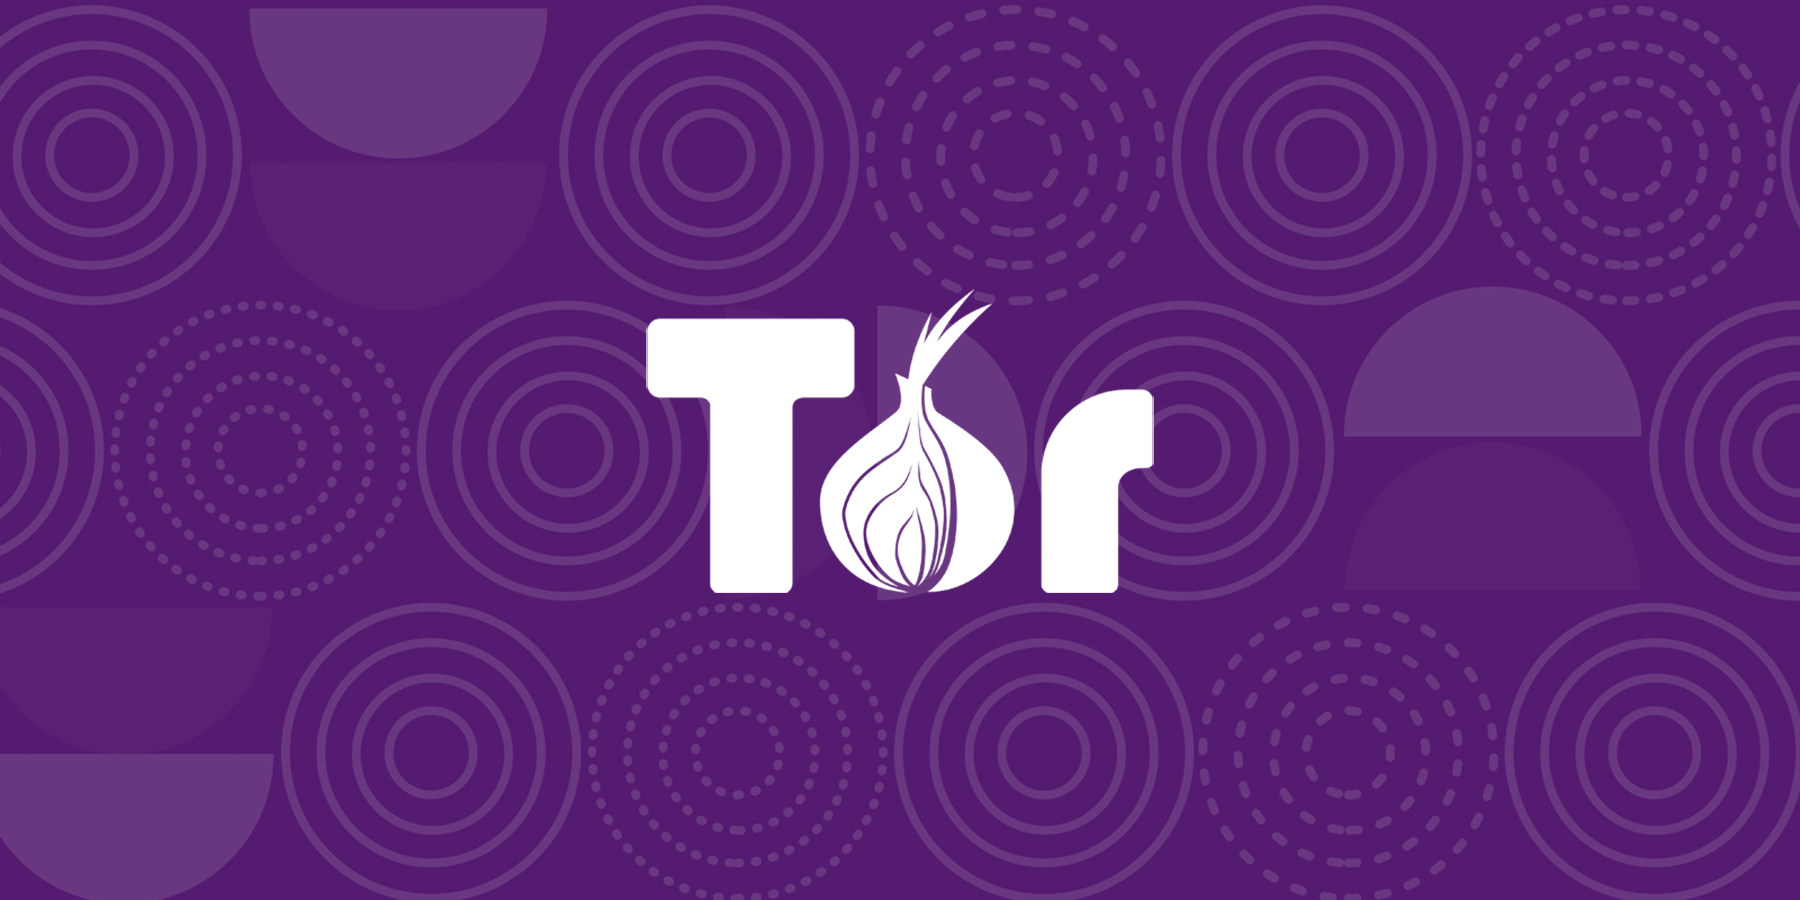  What Is Tor Browser, and How to Use it?